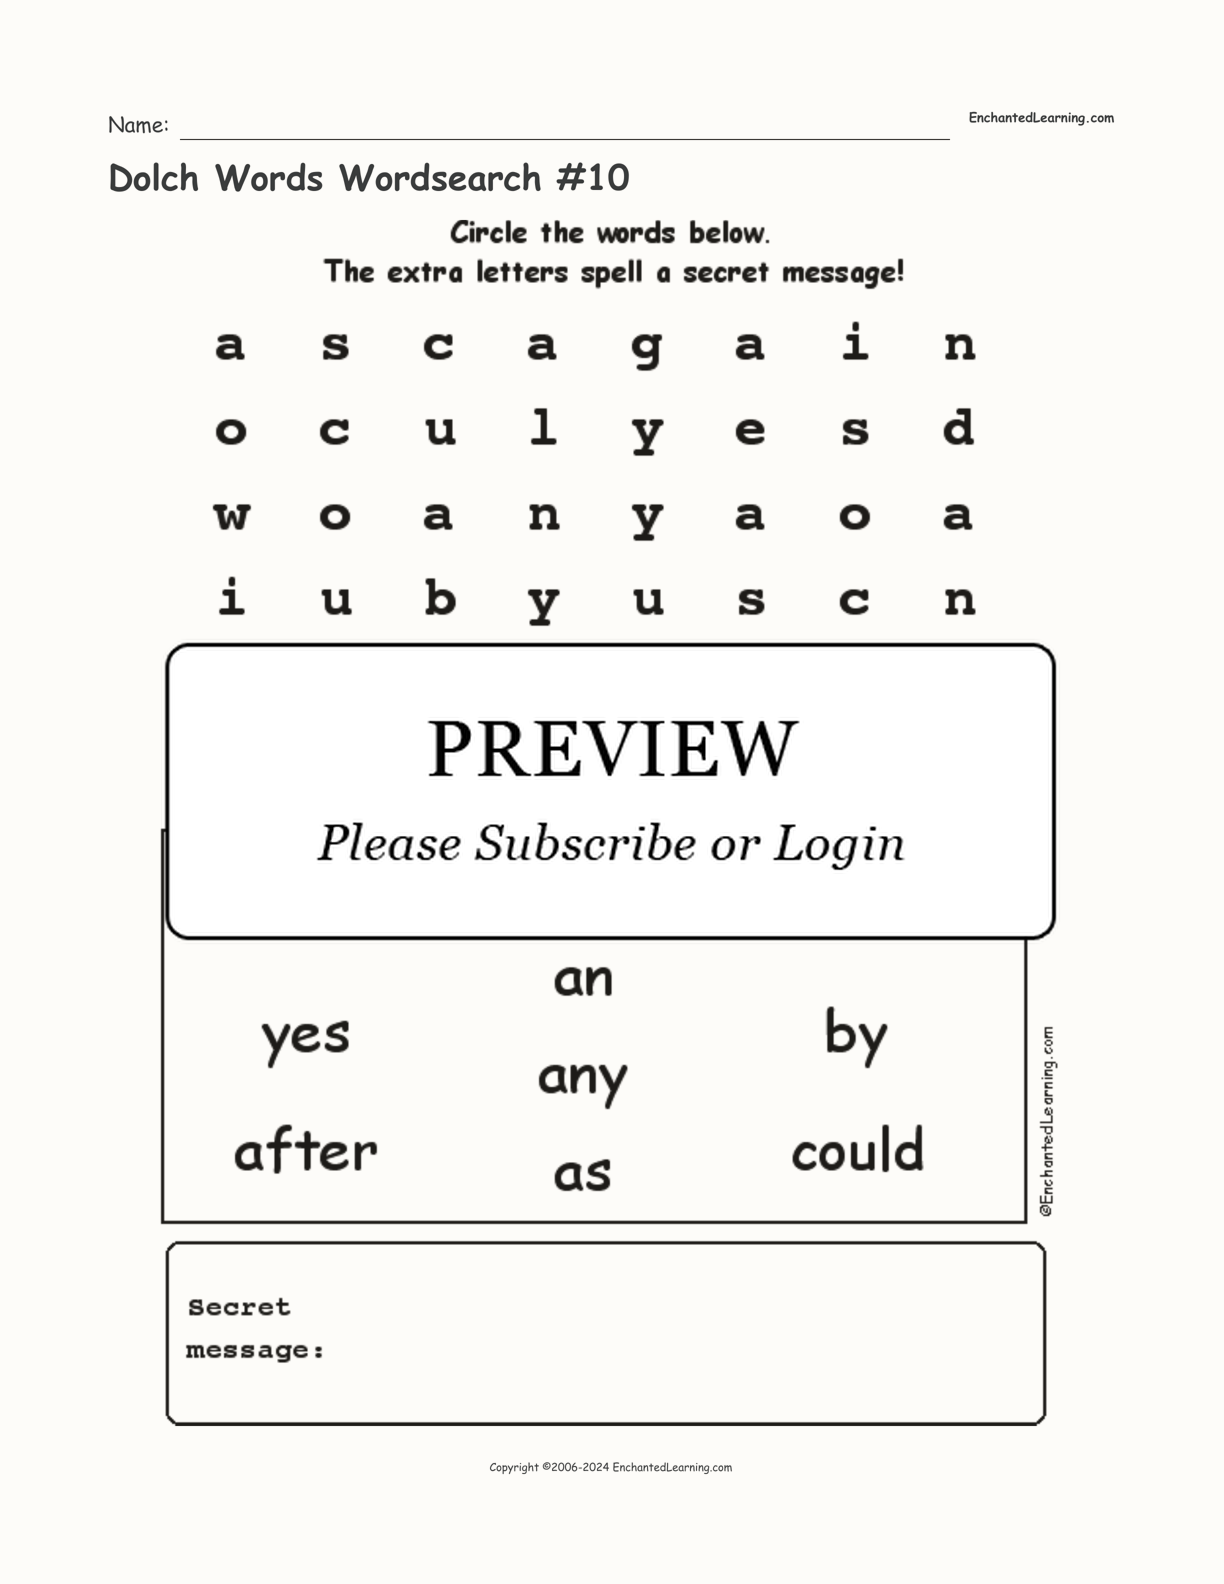 Dolch Words Wordsearch #10 interactive worksheet page 1